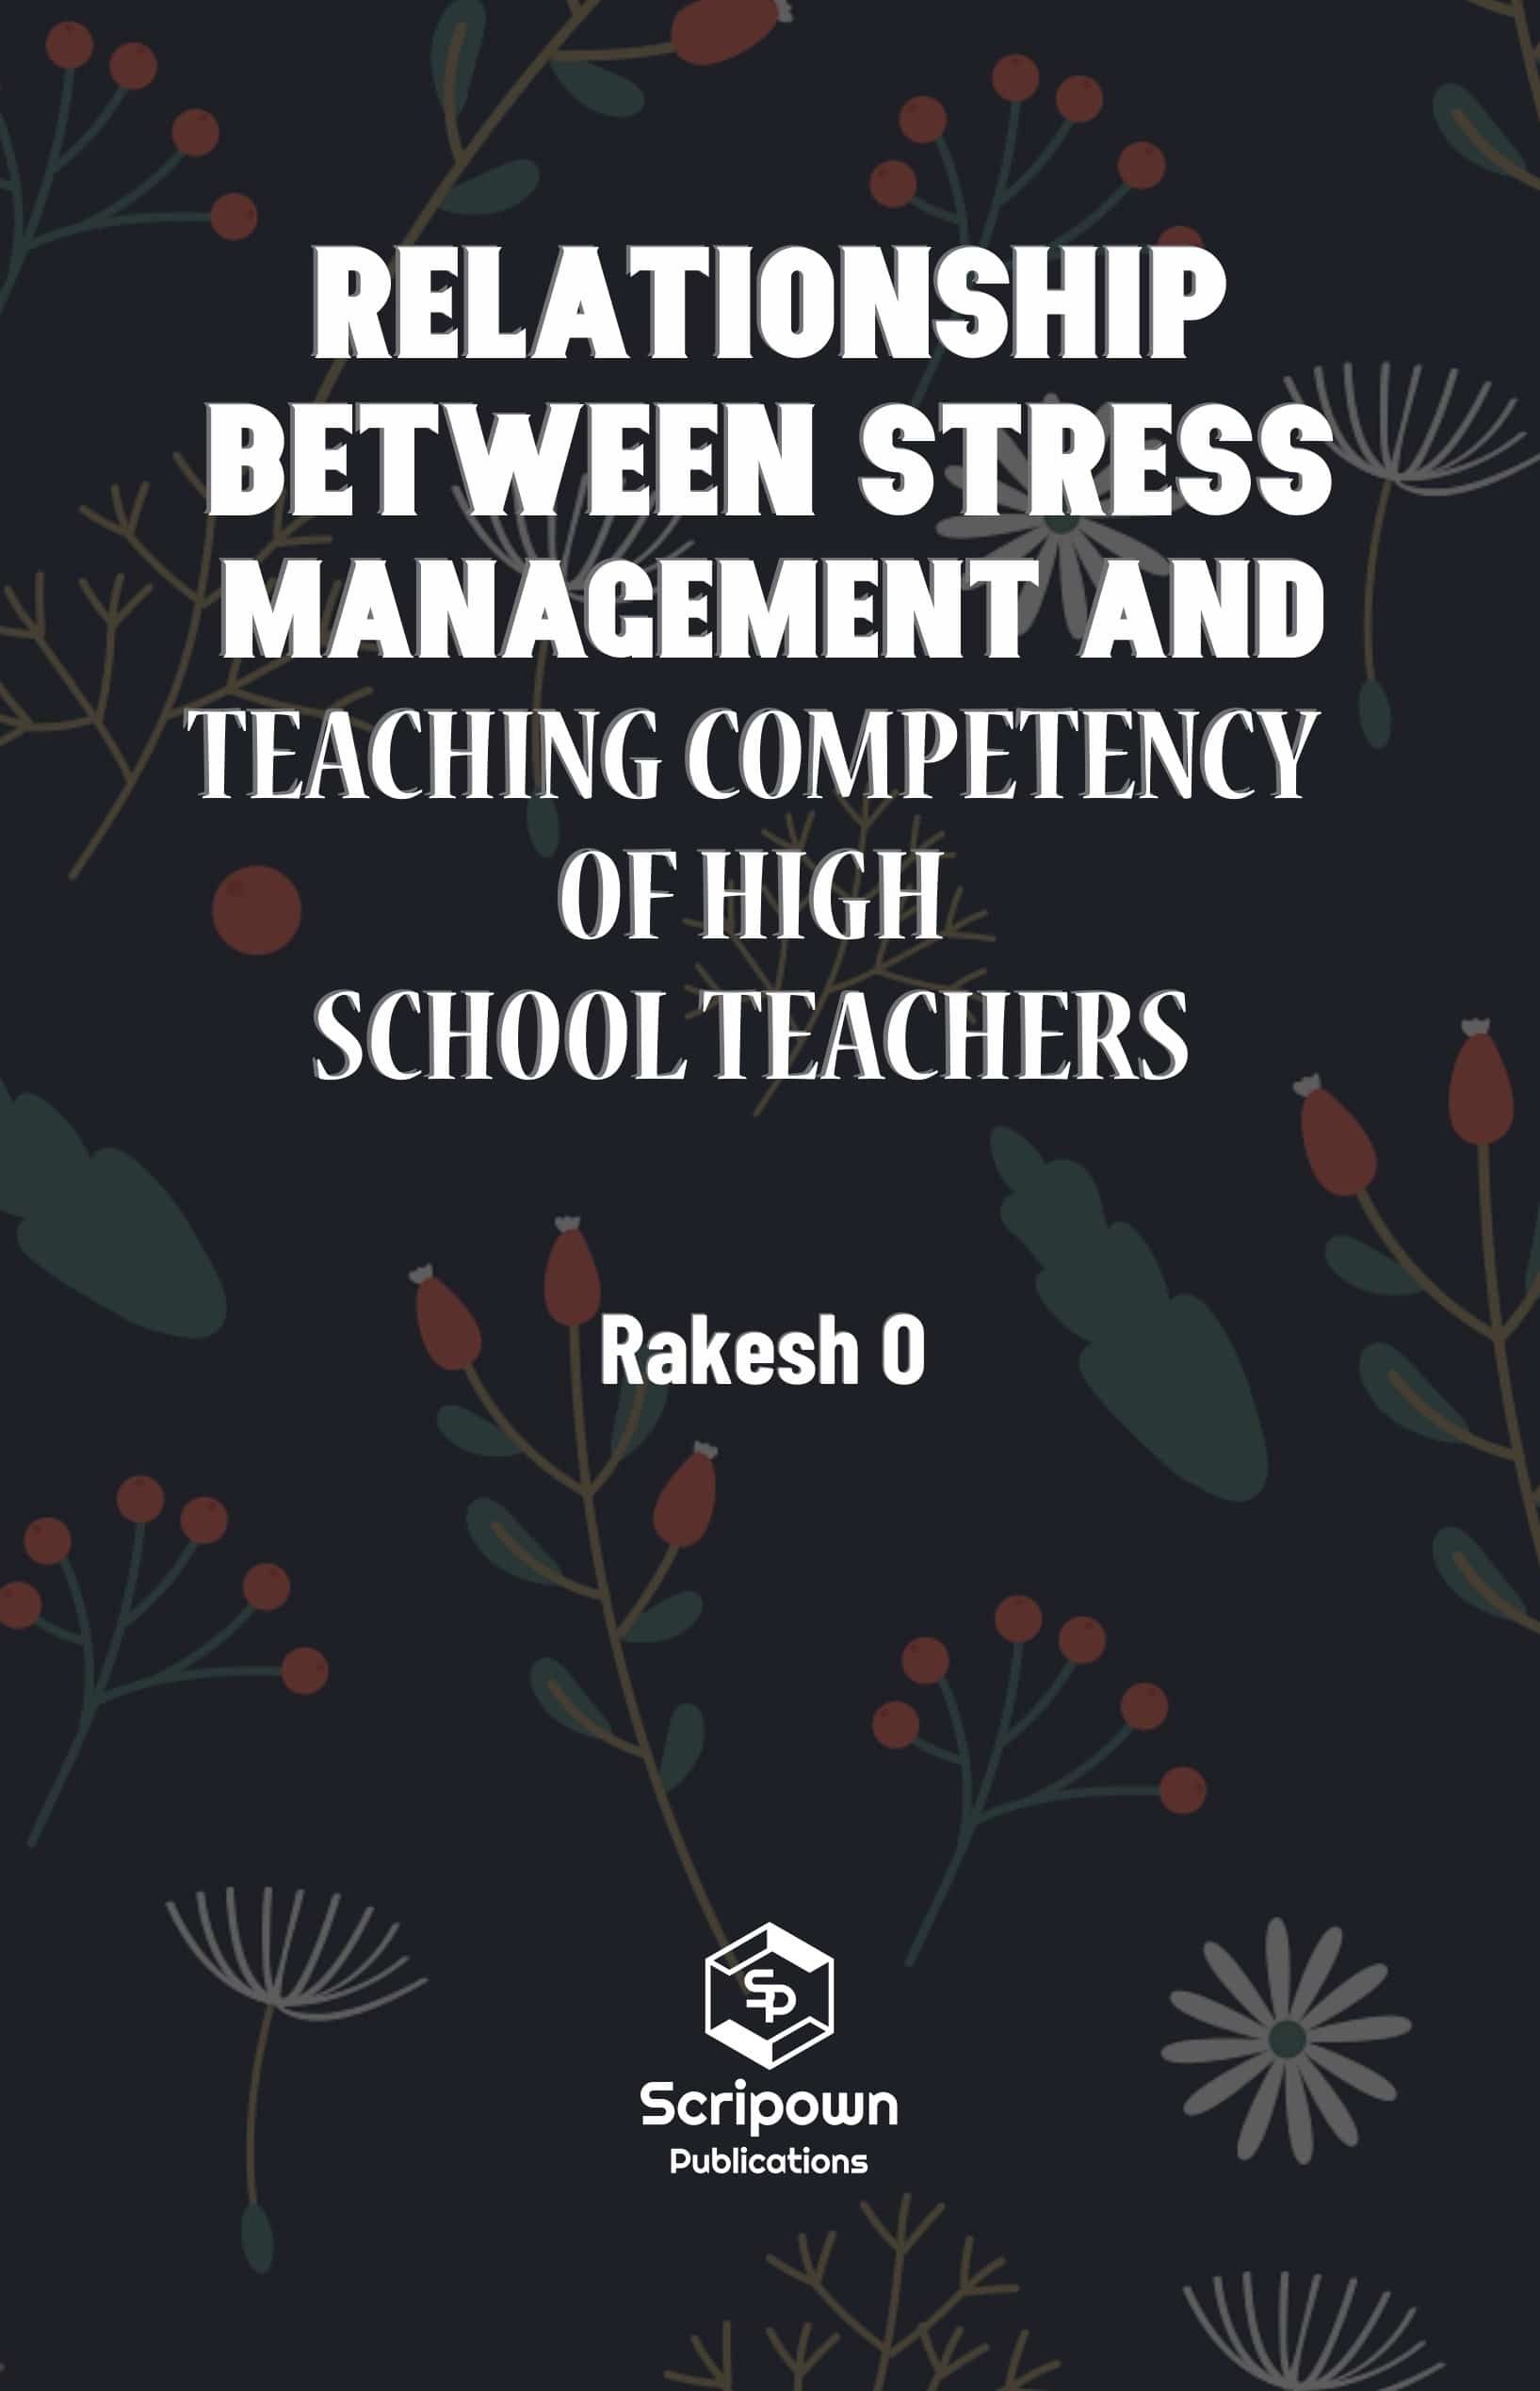 Relationship between Stress Management and Teaching Competency of High School Teachers